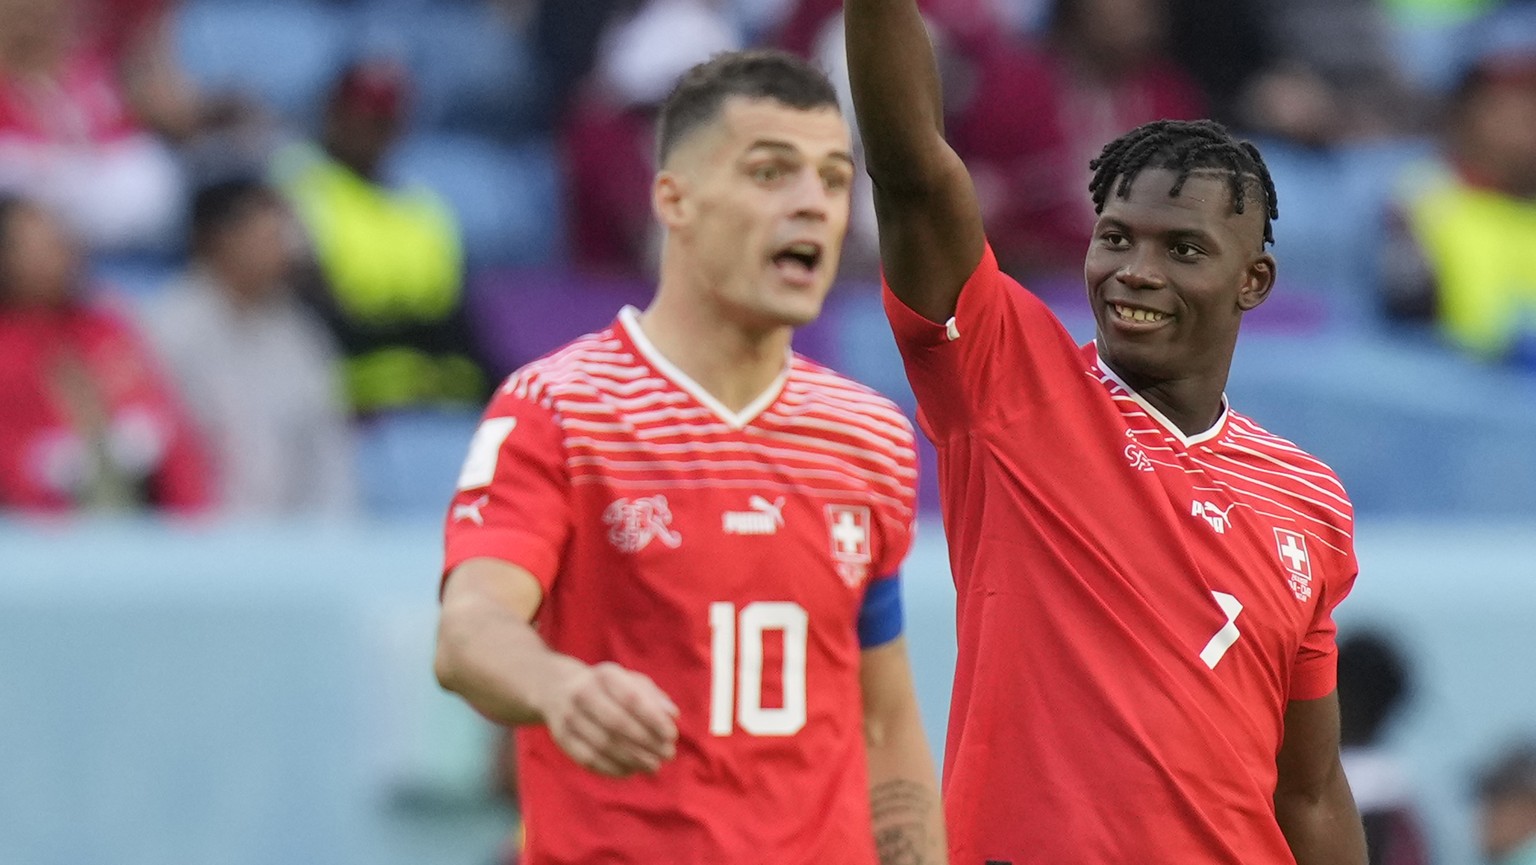 Switzerland's Breel Embolo, right, celebrates after scoring his side's opening goal during the World Cup group G soccer match between Switzerland and Cameroon, at the Al Janoub Stadium in Al Wakrah, Q ...